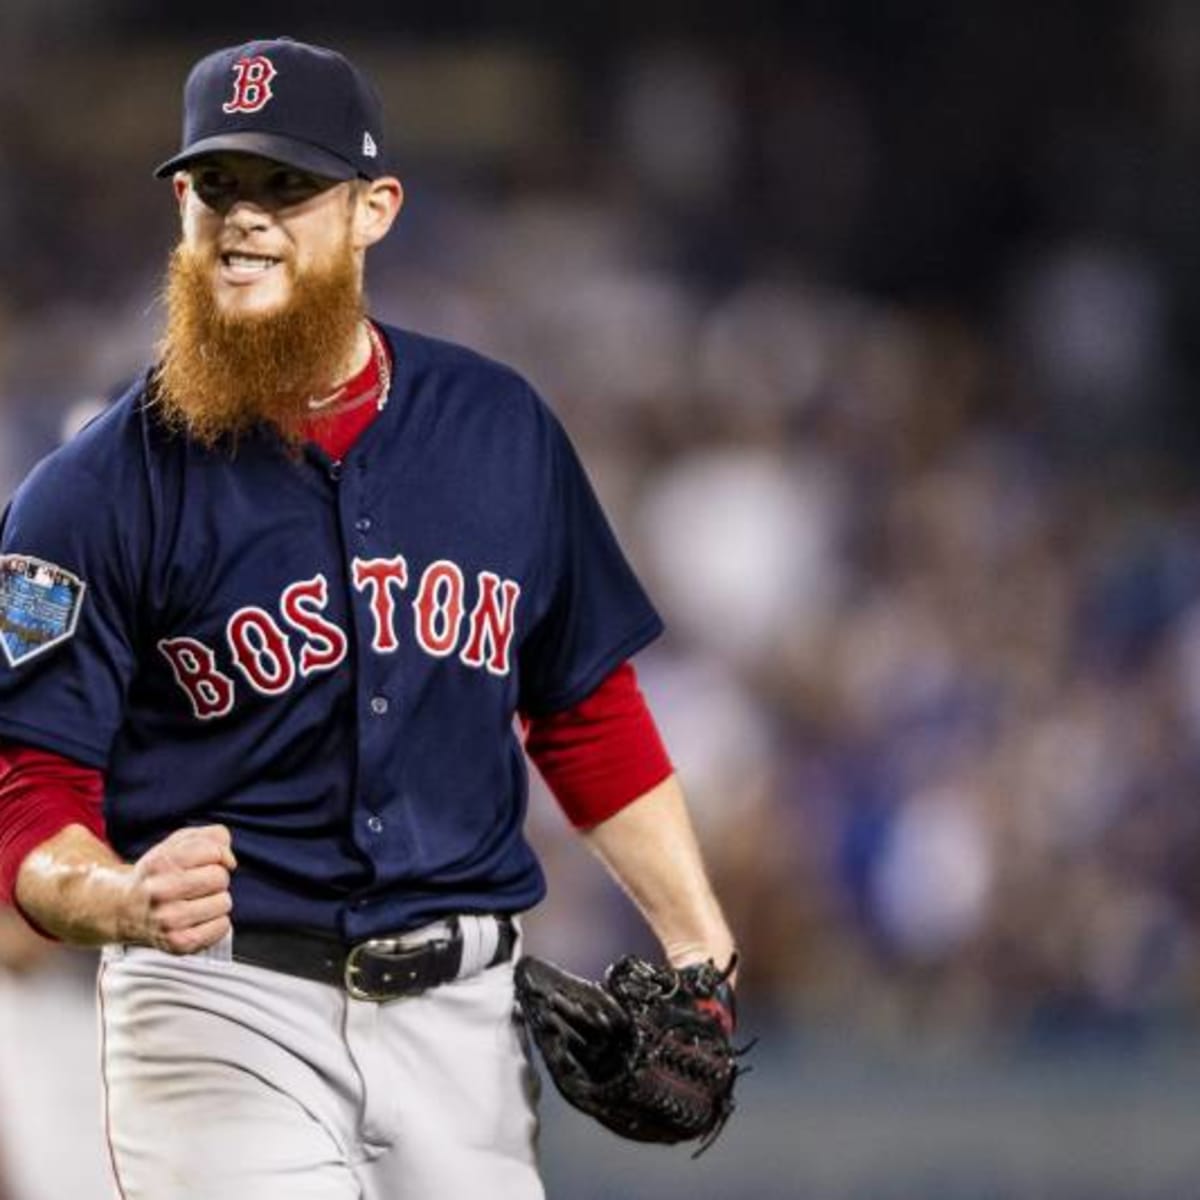 Free-Agent Closer Craig Kimbrel, Cubs Agree to 3-Year Deal, Chicago News